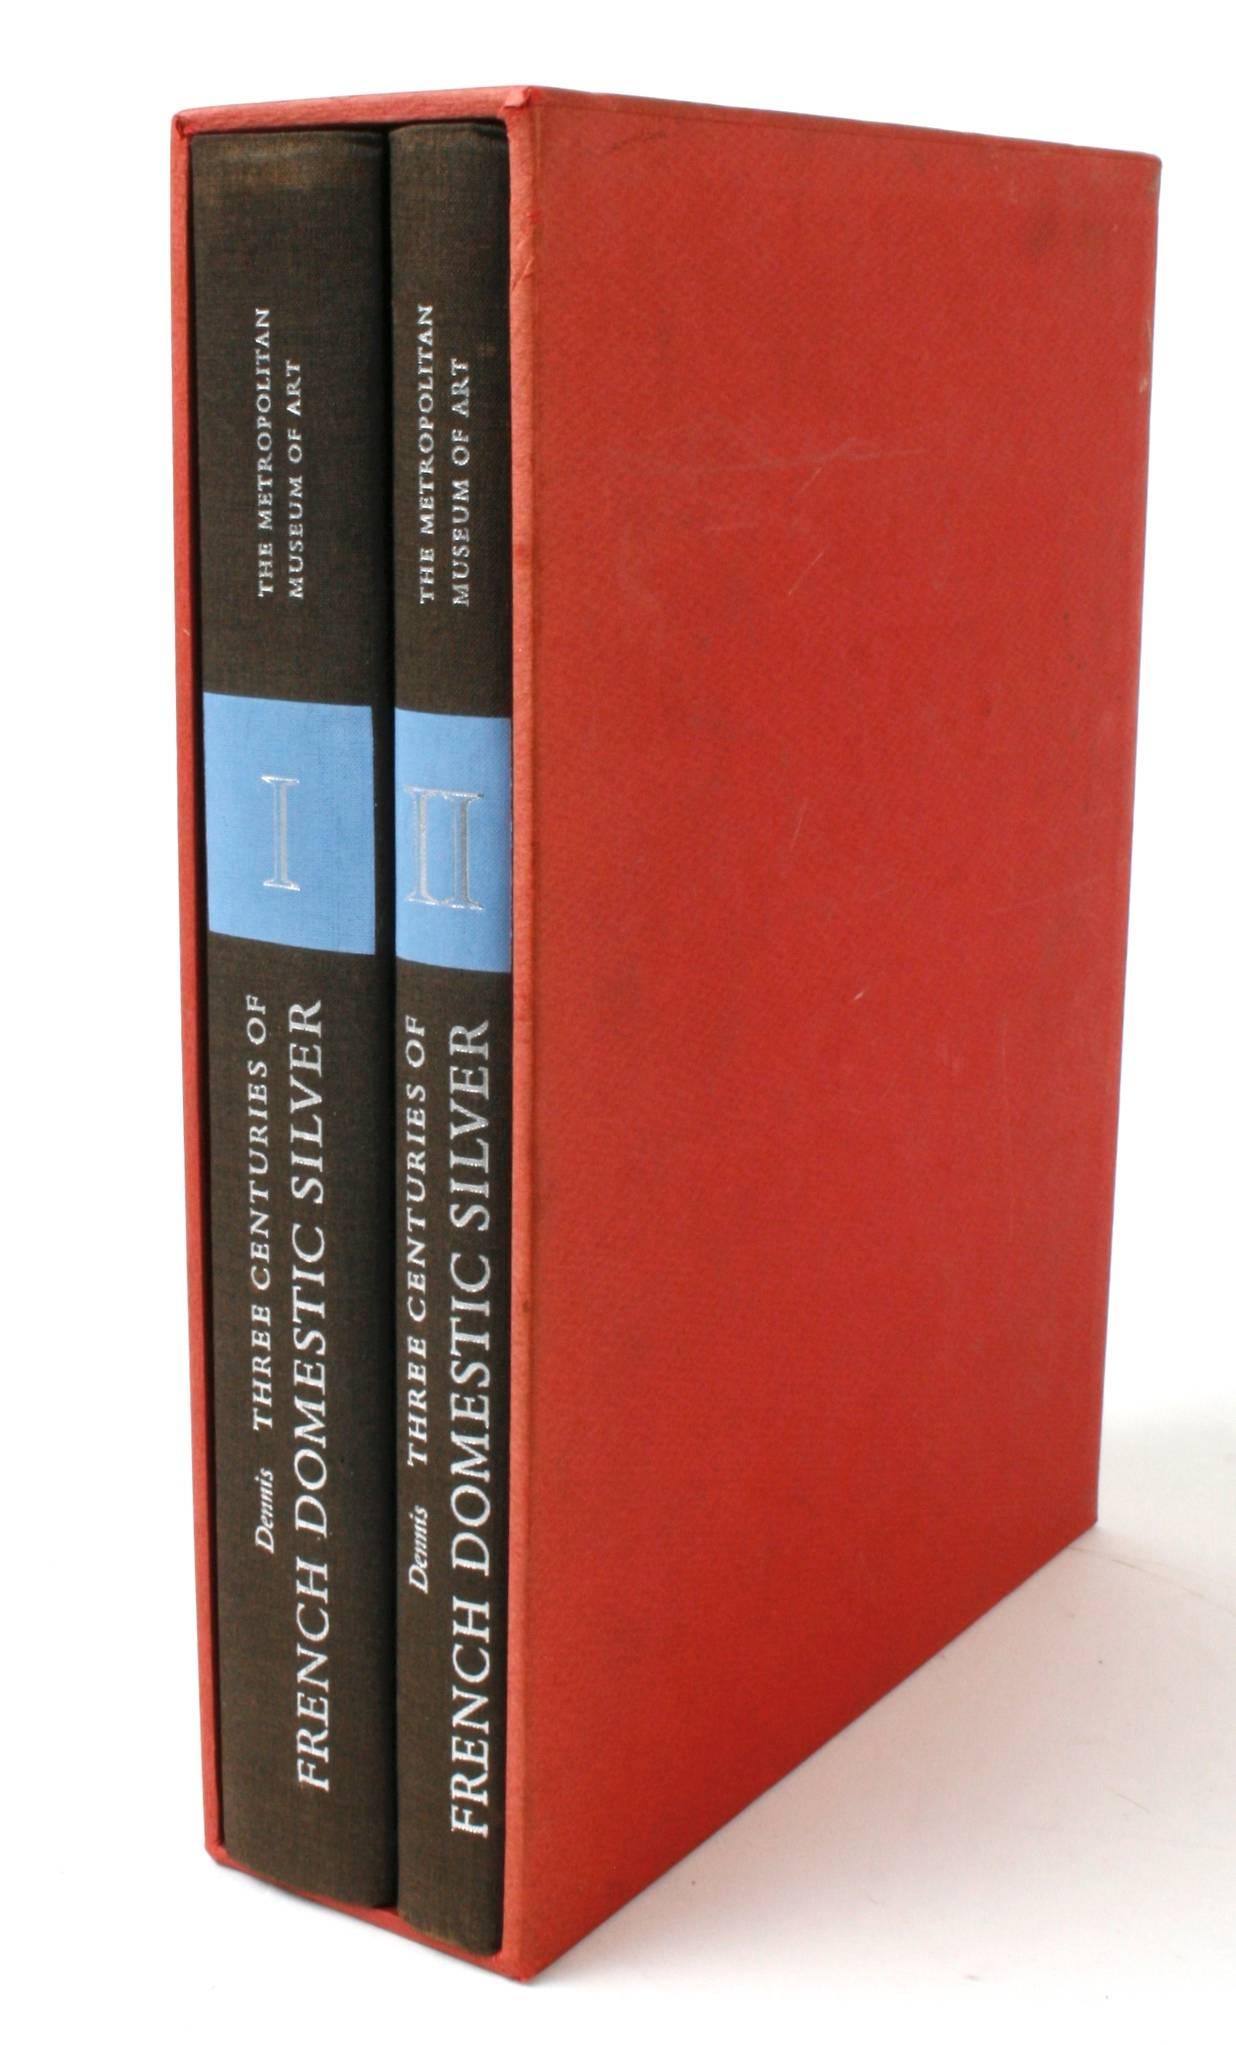 The Metropolitan Museum of Art, three centuries of French Domestic Silver by Faith Dennis Volumes I & II. New York: The Metropolitan Museum of Art, 1960. 1st Ed hardcovers with slipcase. 567 pp. A beautiful two volume set on French domestic silver,